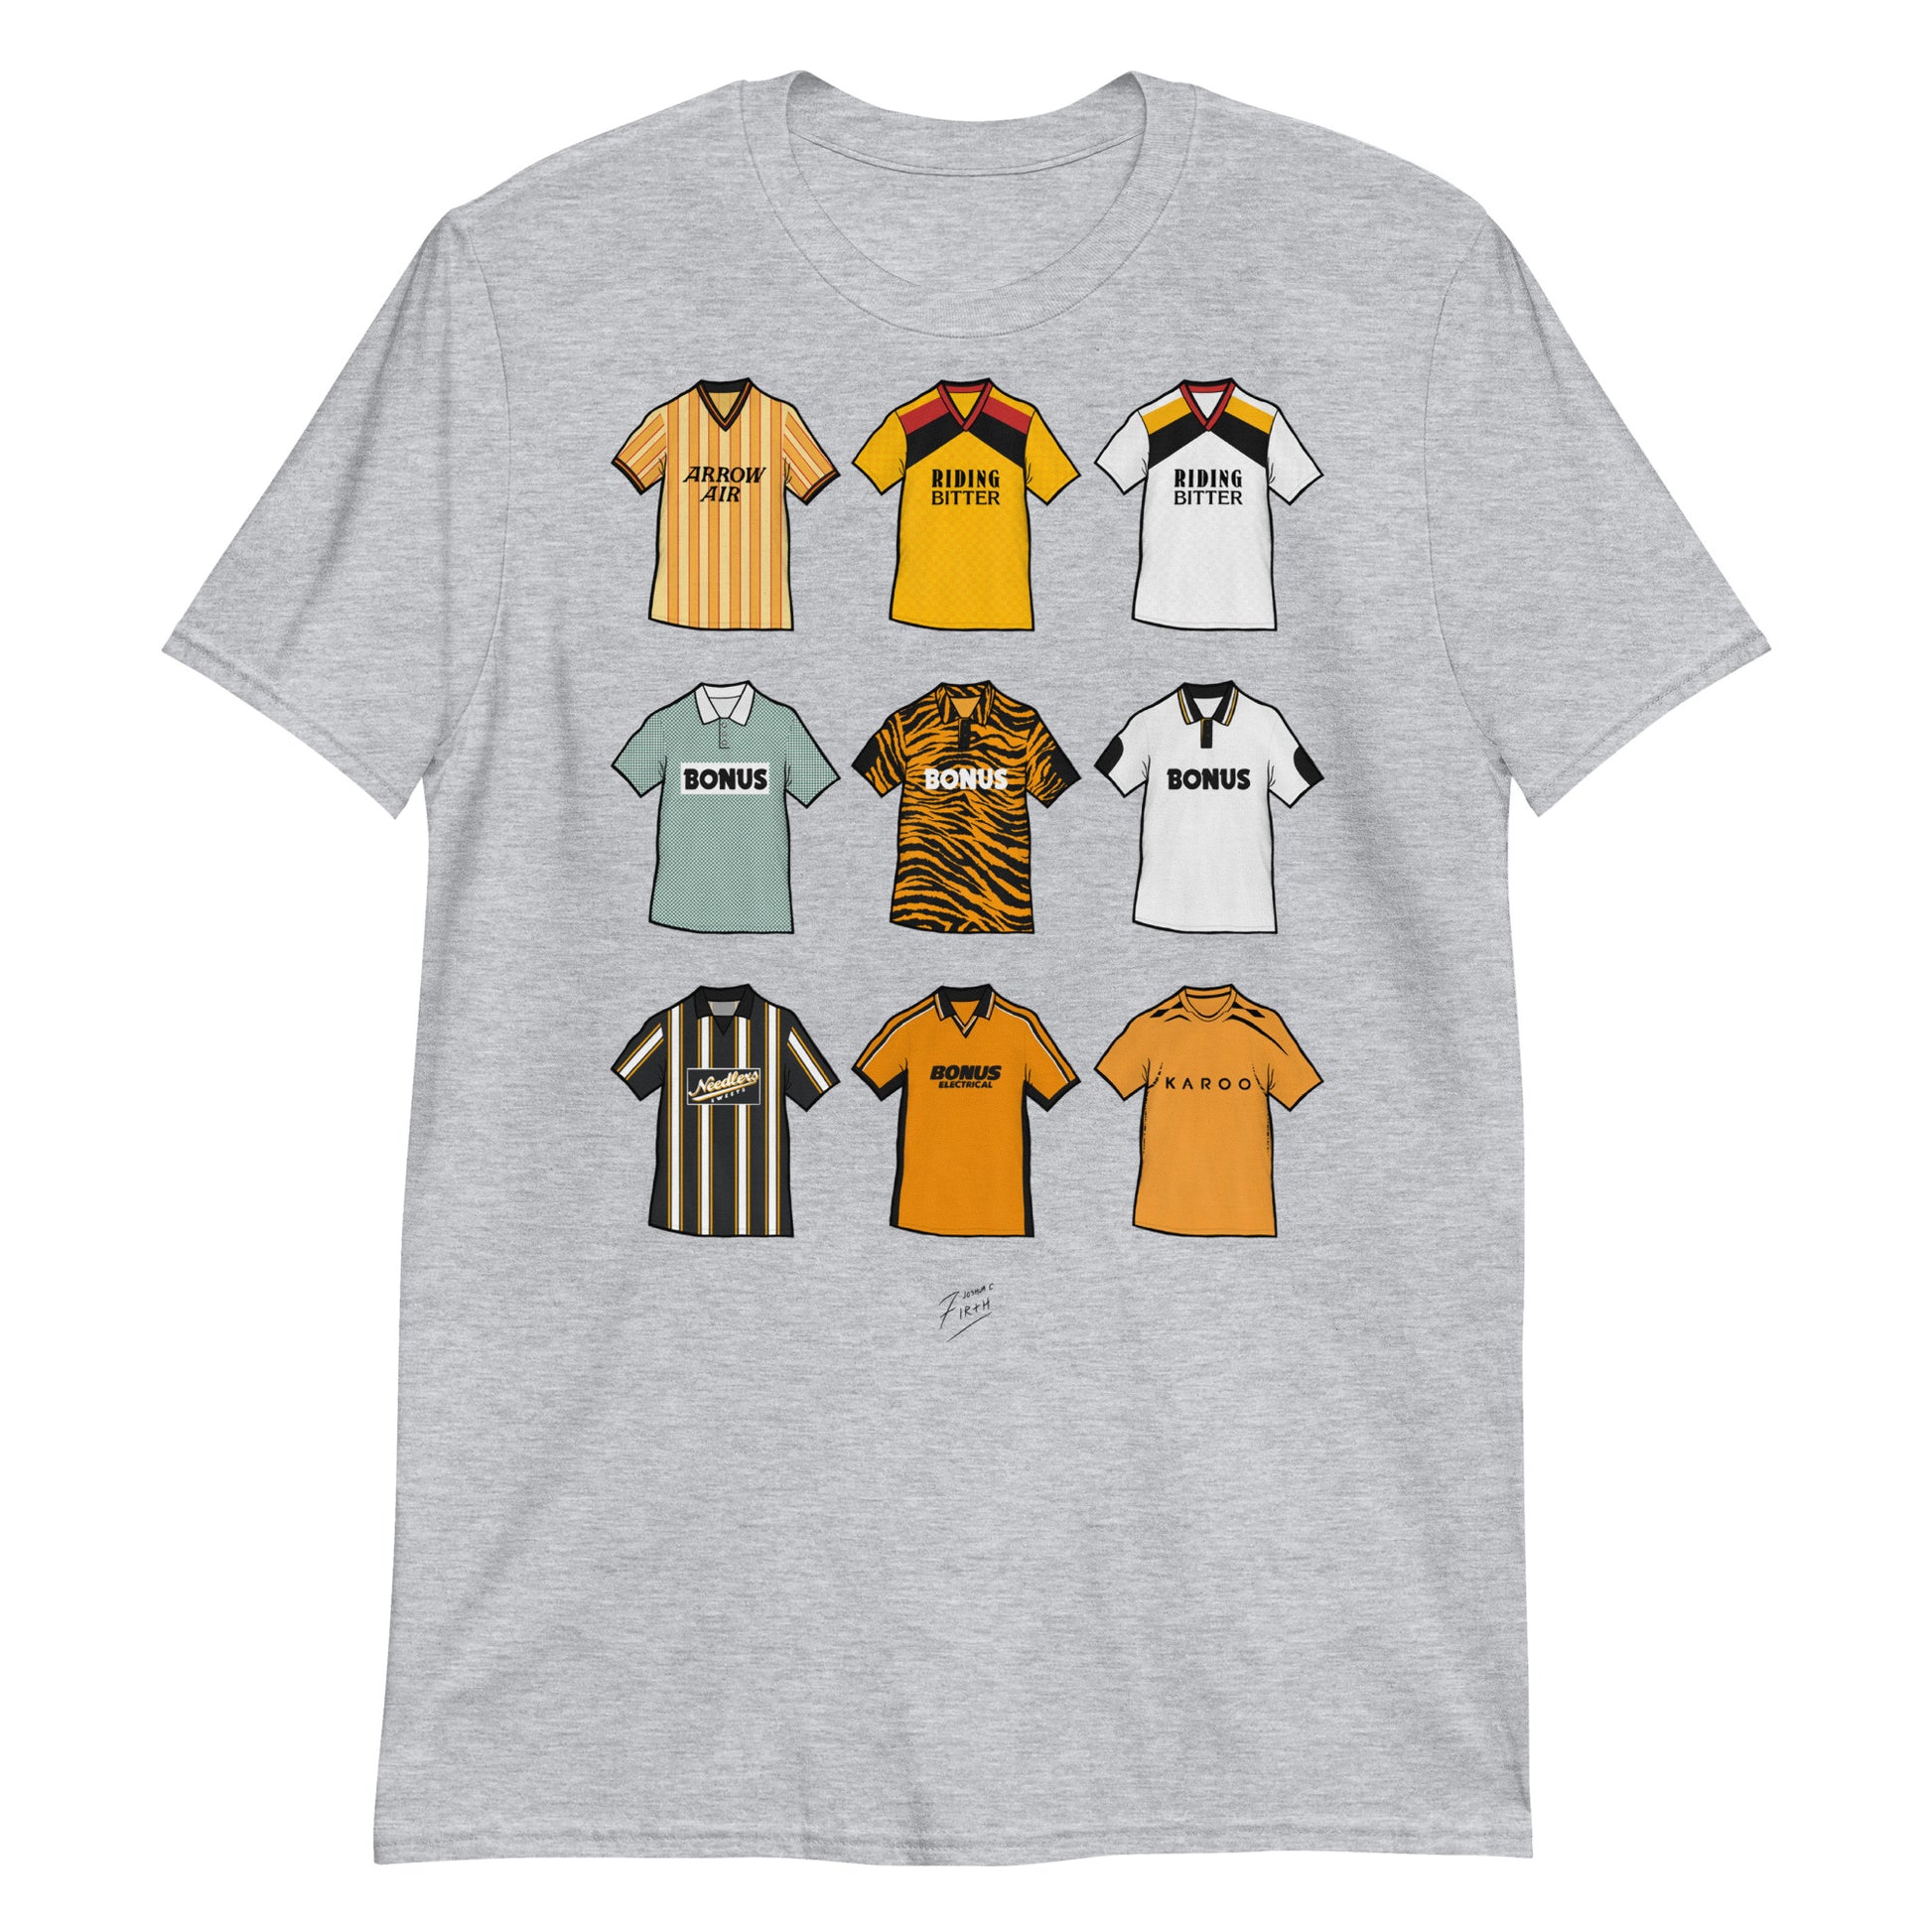 Light Grey Hull City themed football t-shirt featuring artwork of some of the most iconic jerseys in the history of the club